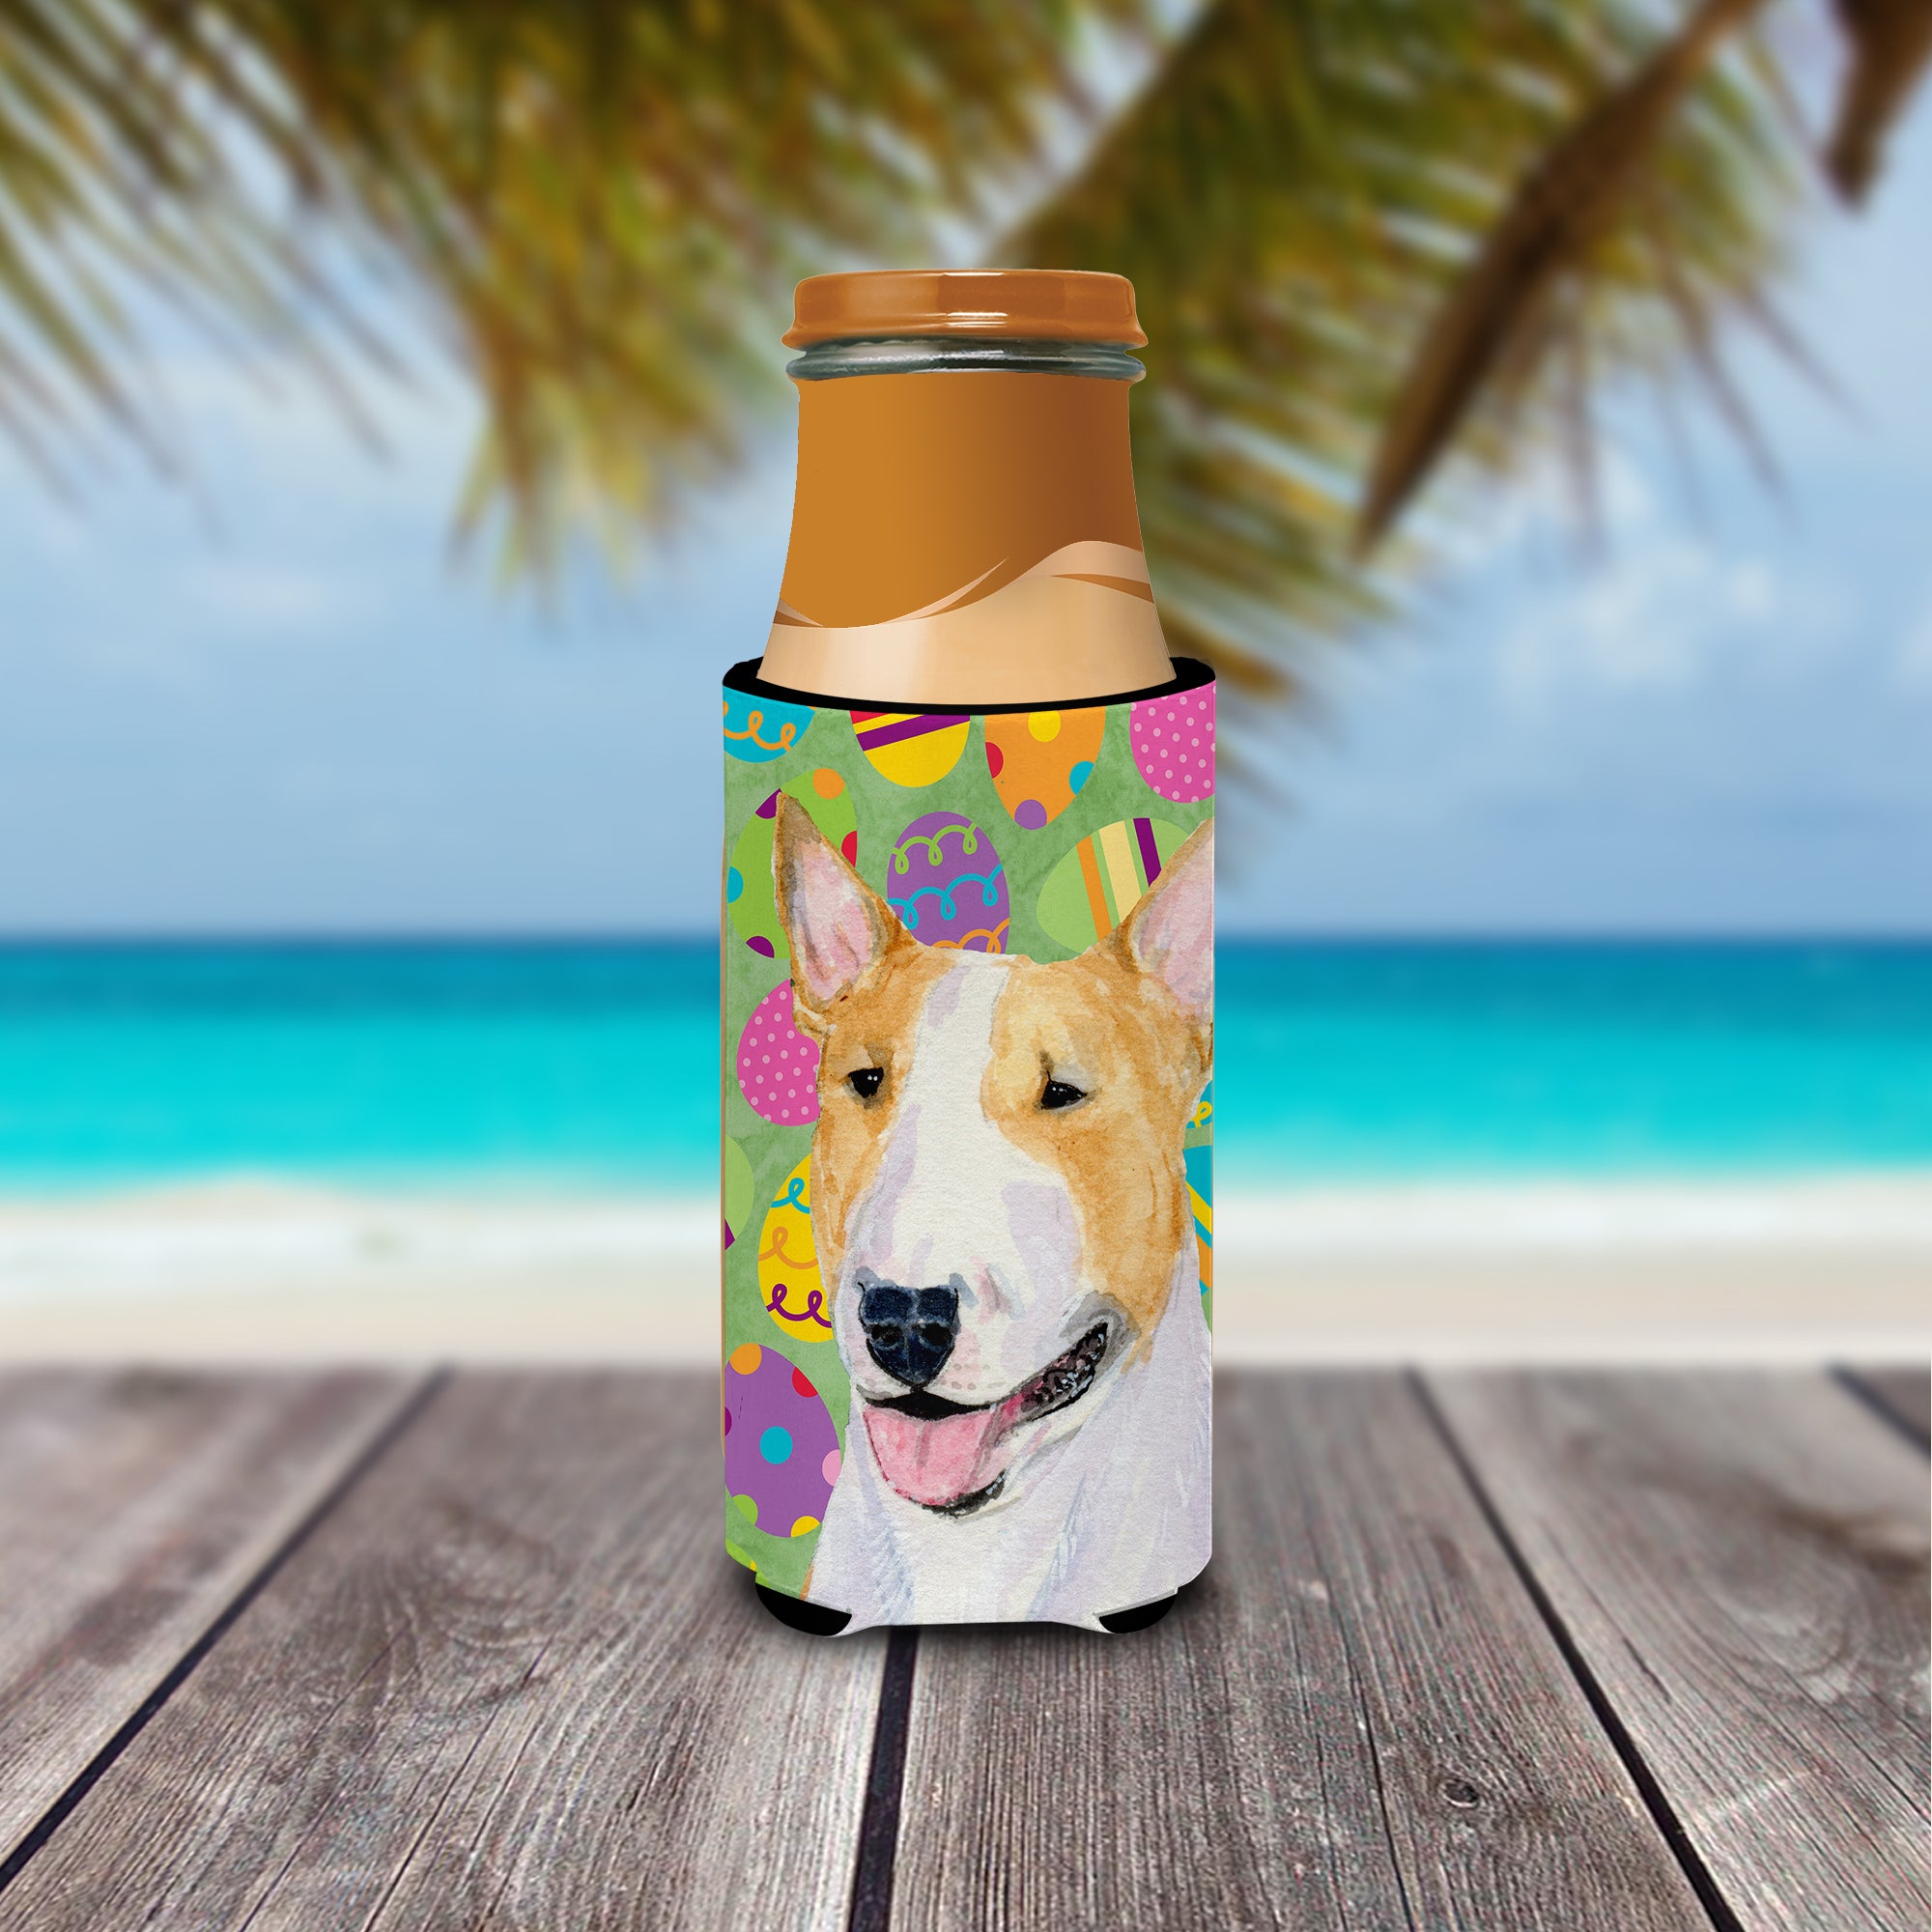 Bull Terrier Easter Eggtravaganza Ultra Beverage Insulators for slim cans SS4841MUK.